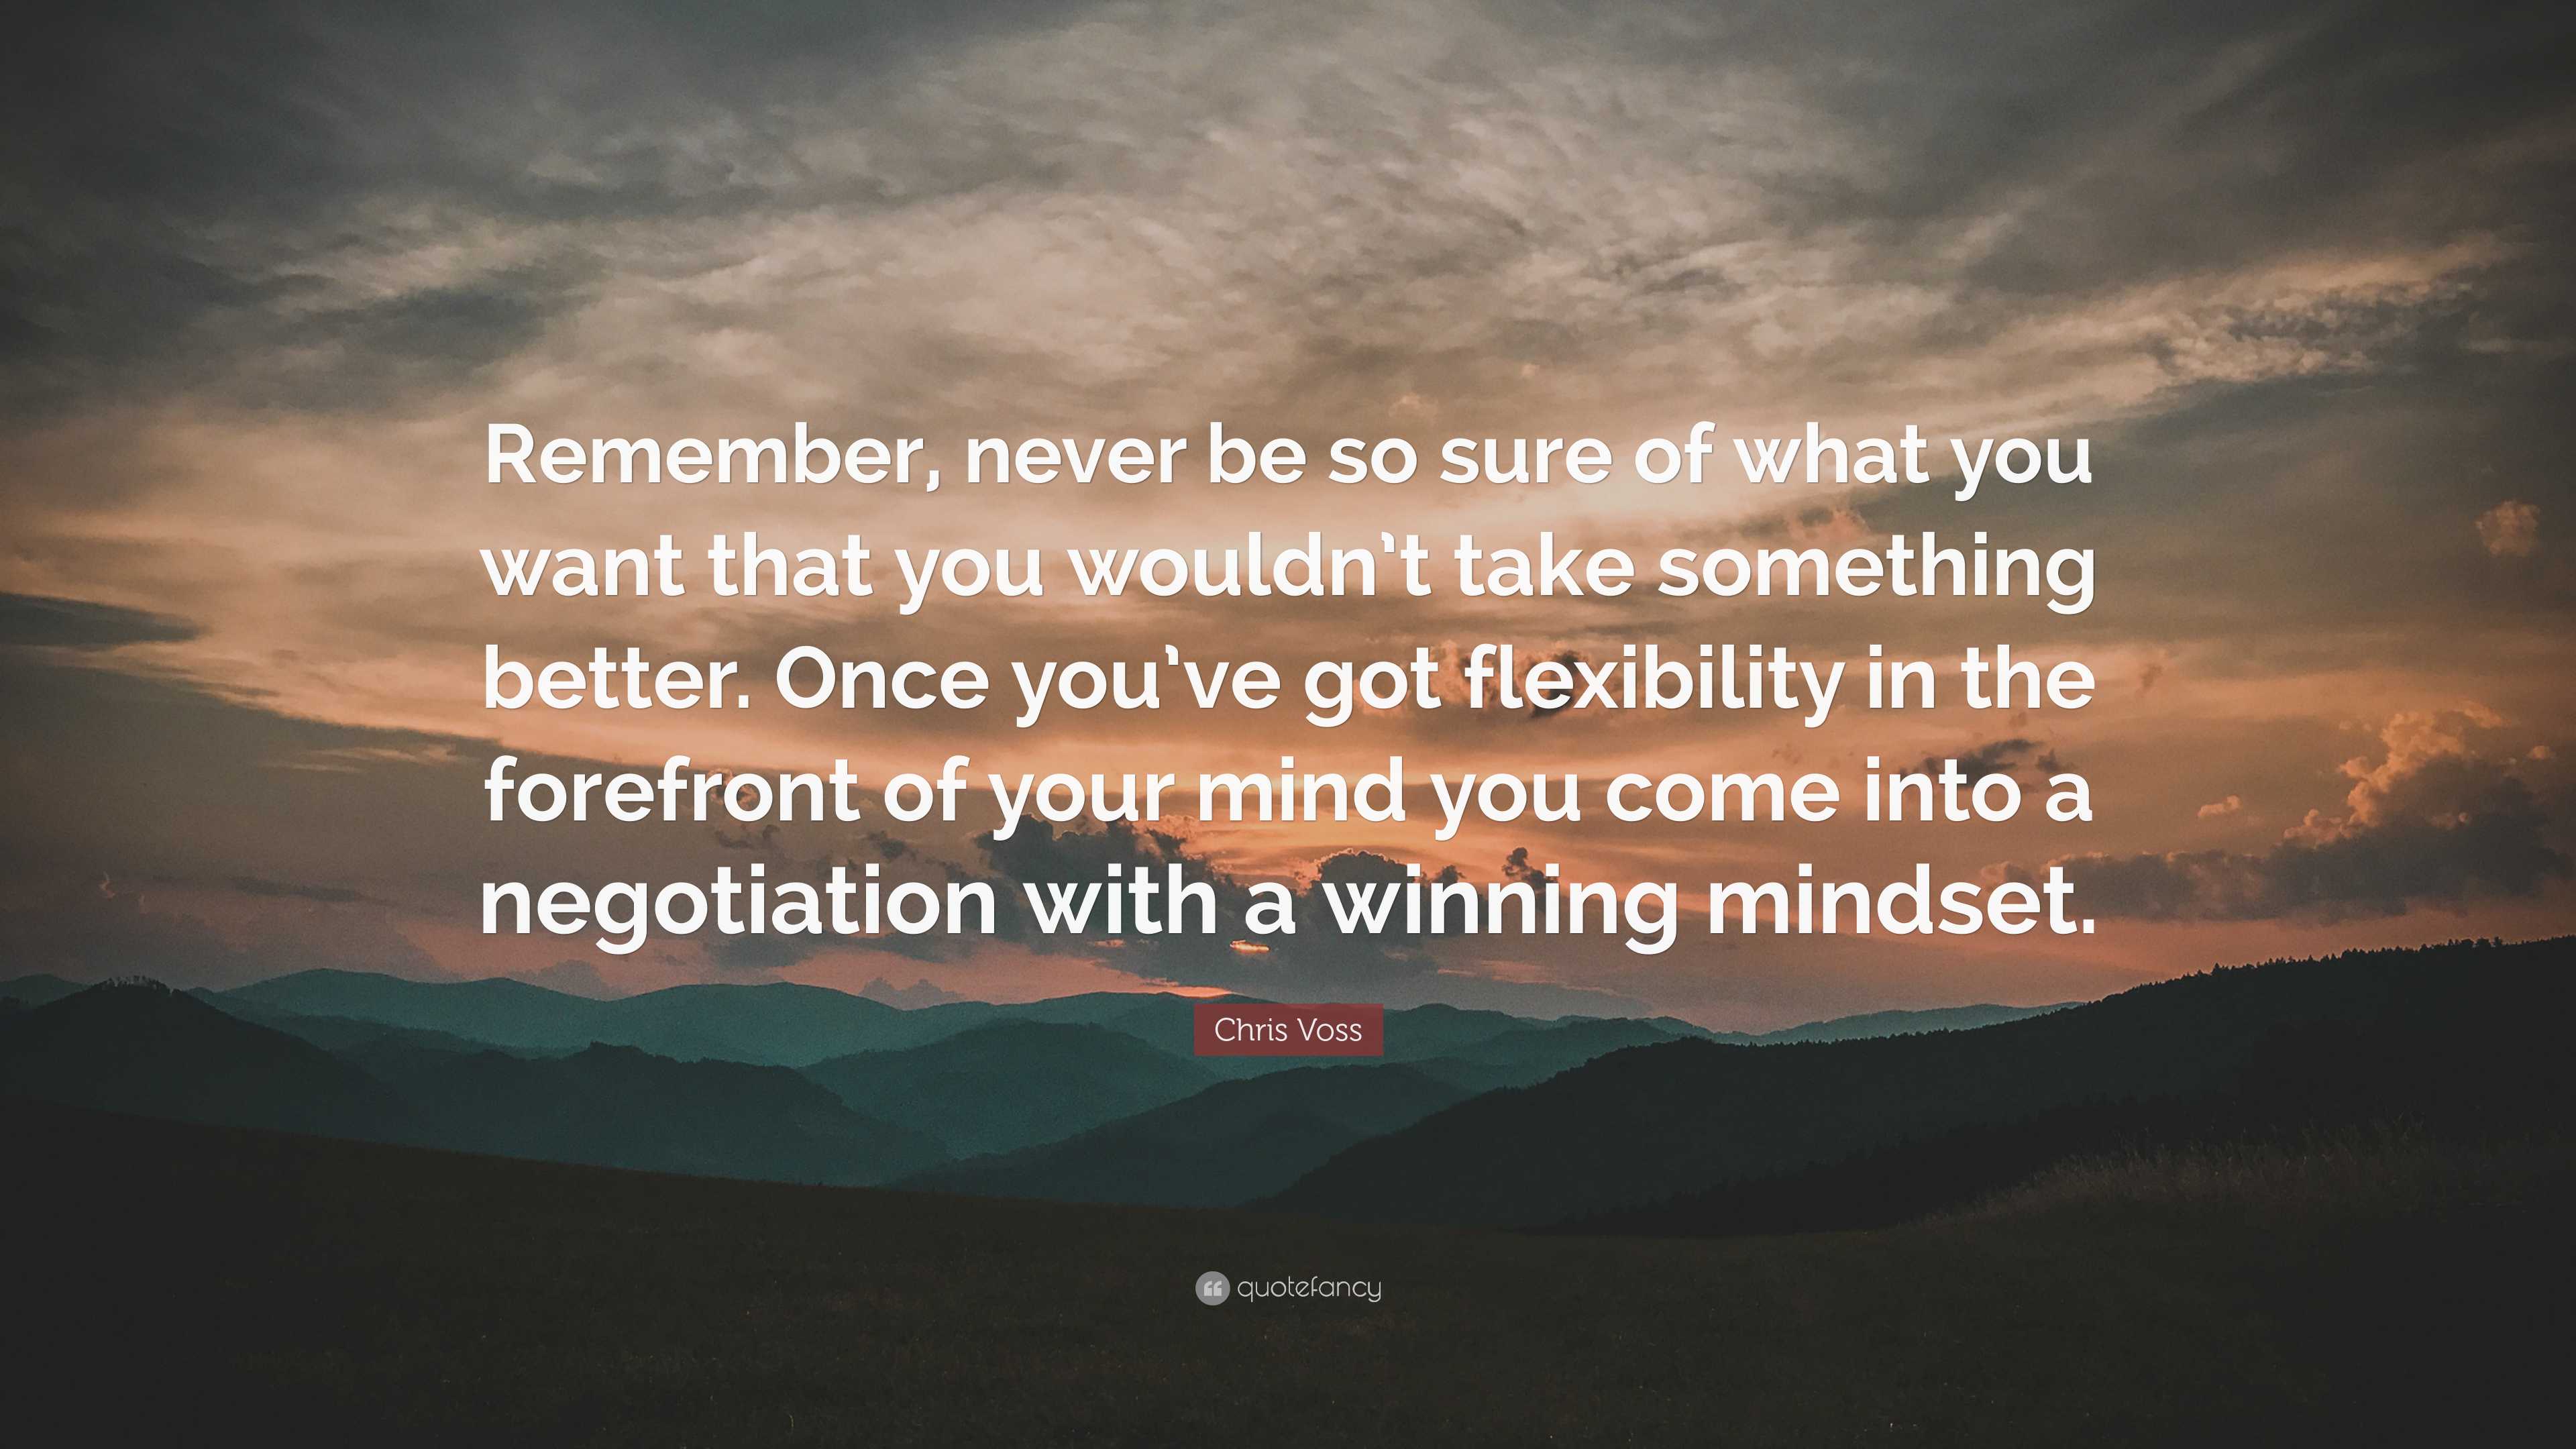 Chris Voss Quote: “Remember, never be so sure of what you want that you ...